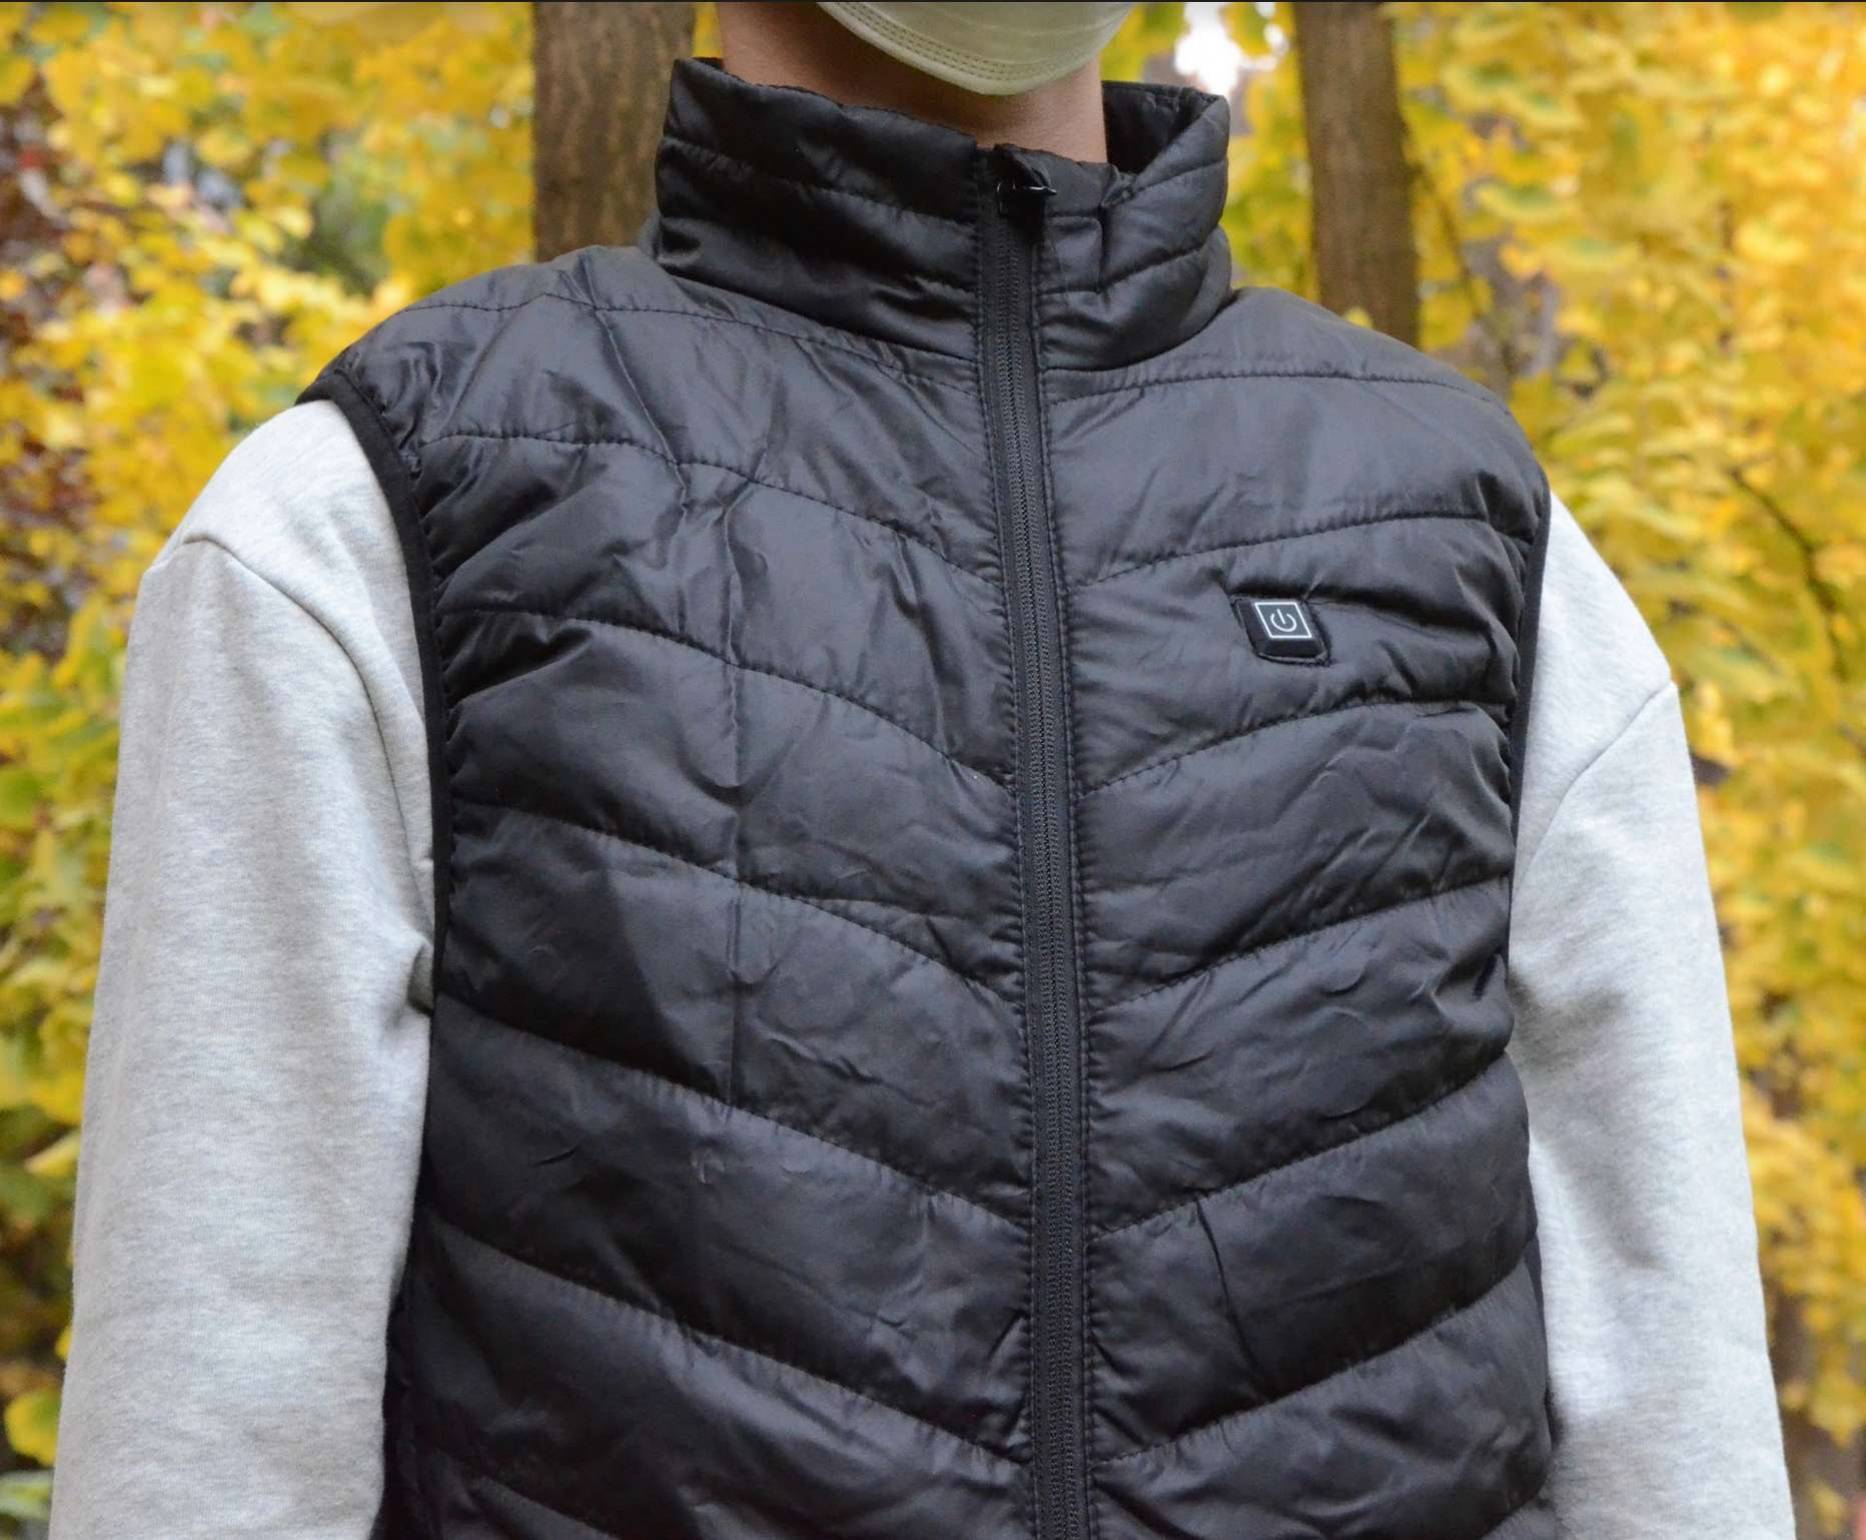 Heated Vest For Golf